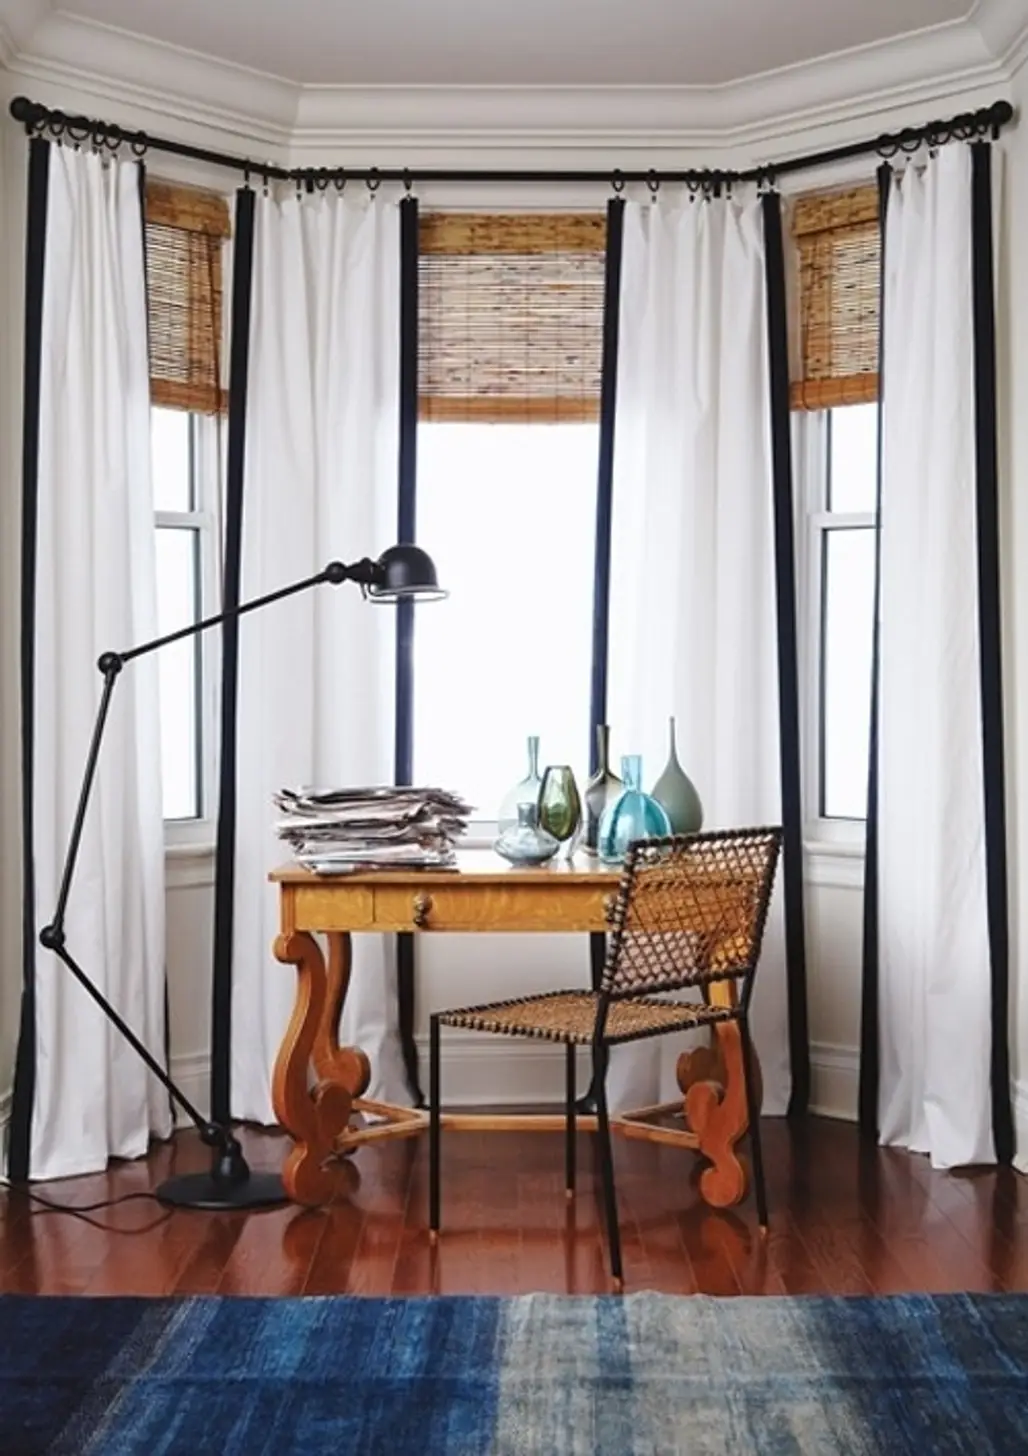 Dress the Windows for Style and Privacy